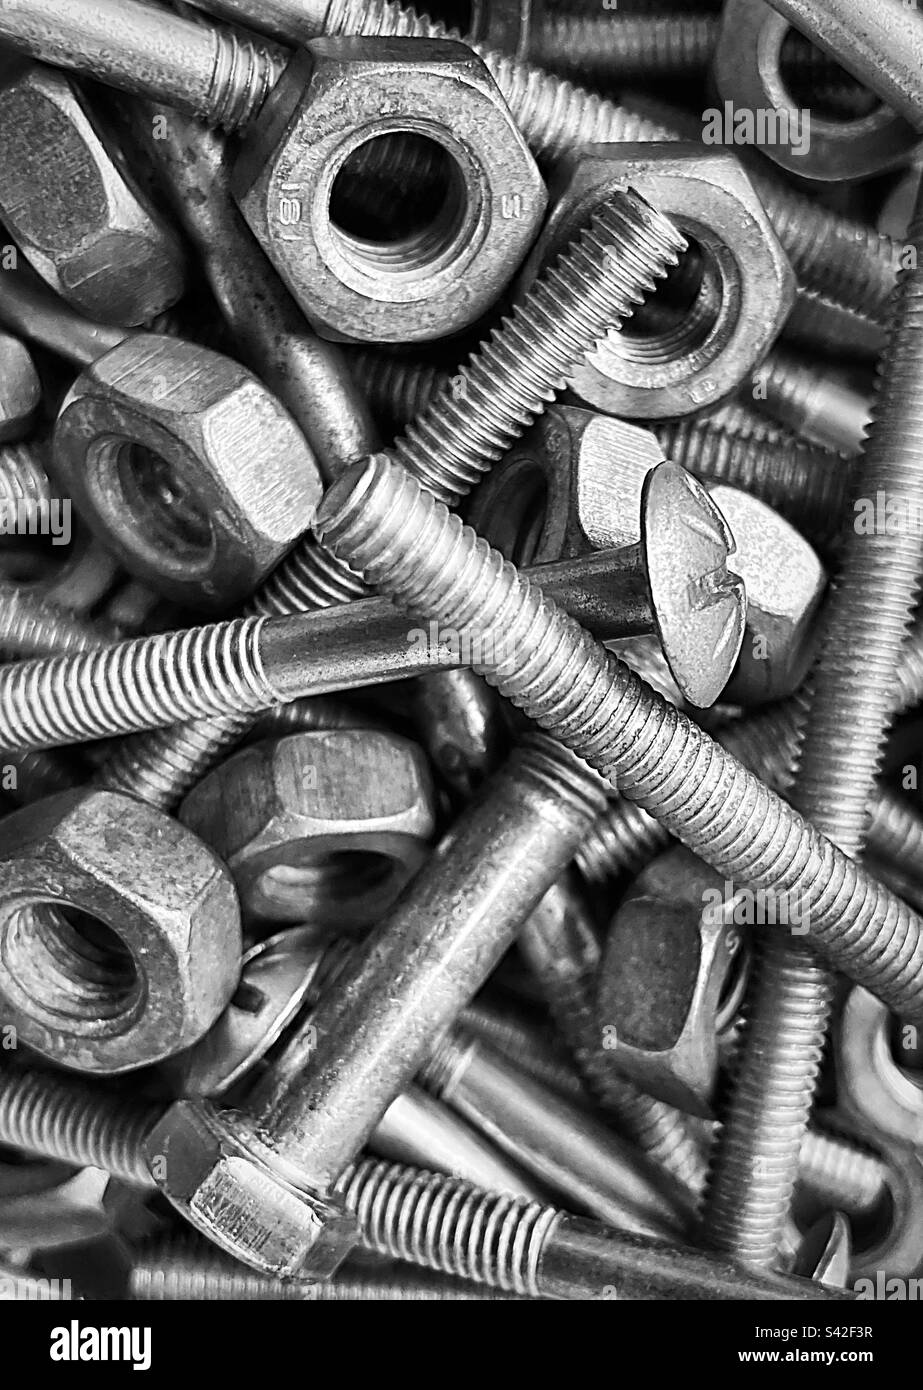 Metal nuts and bolts close up (Black & White) Stock Photo